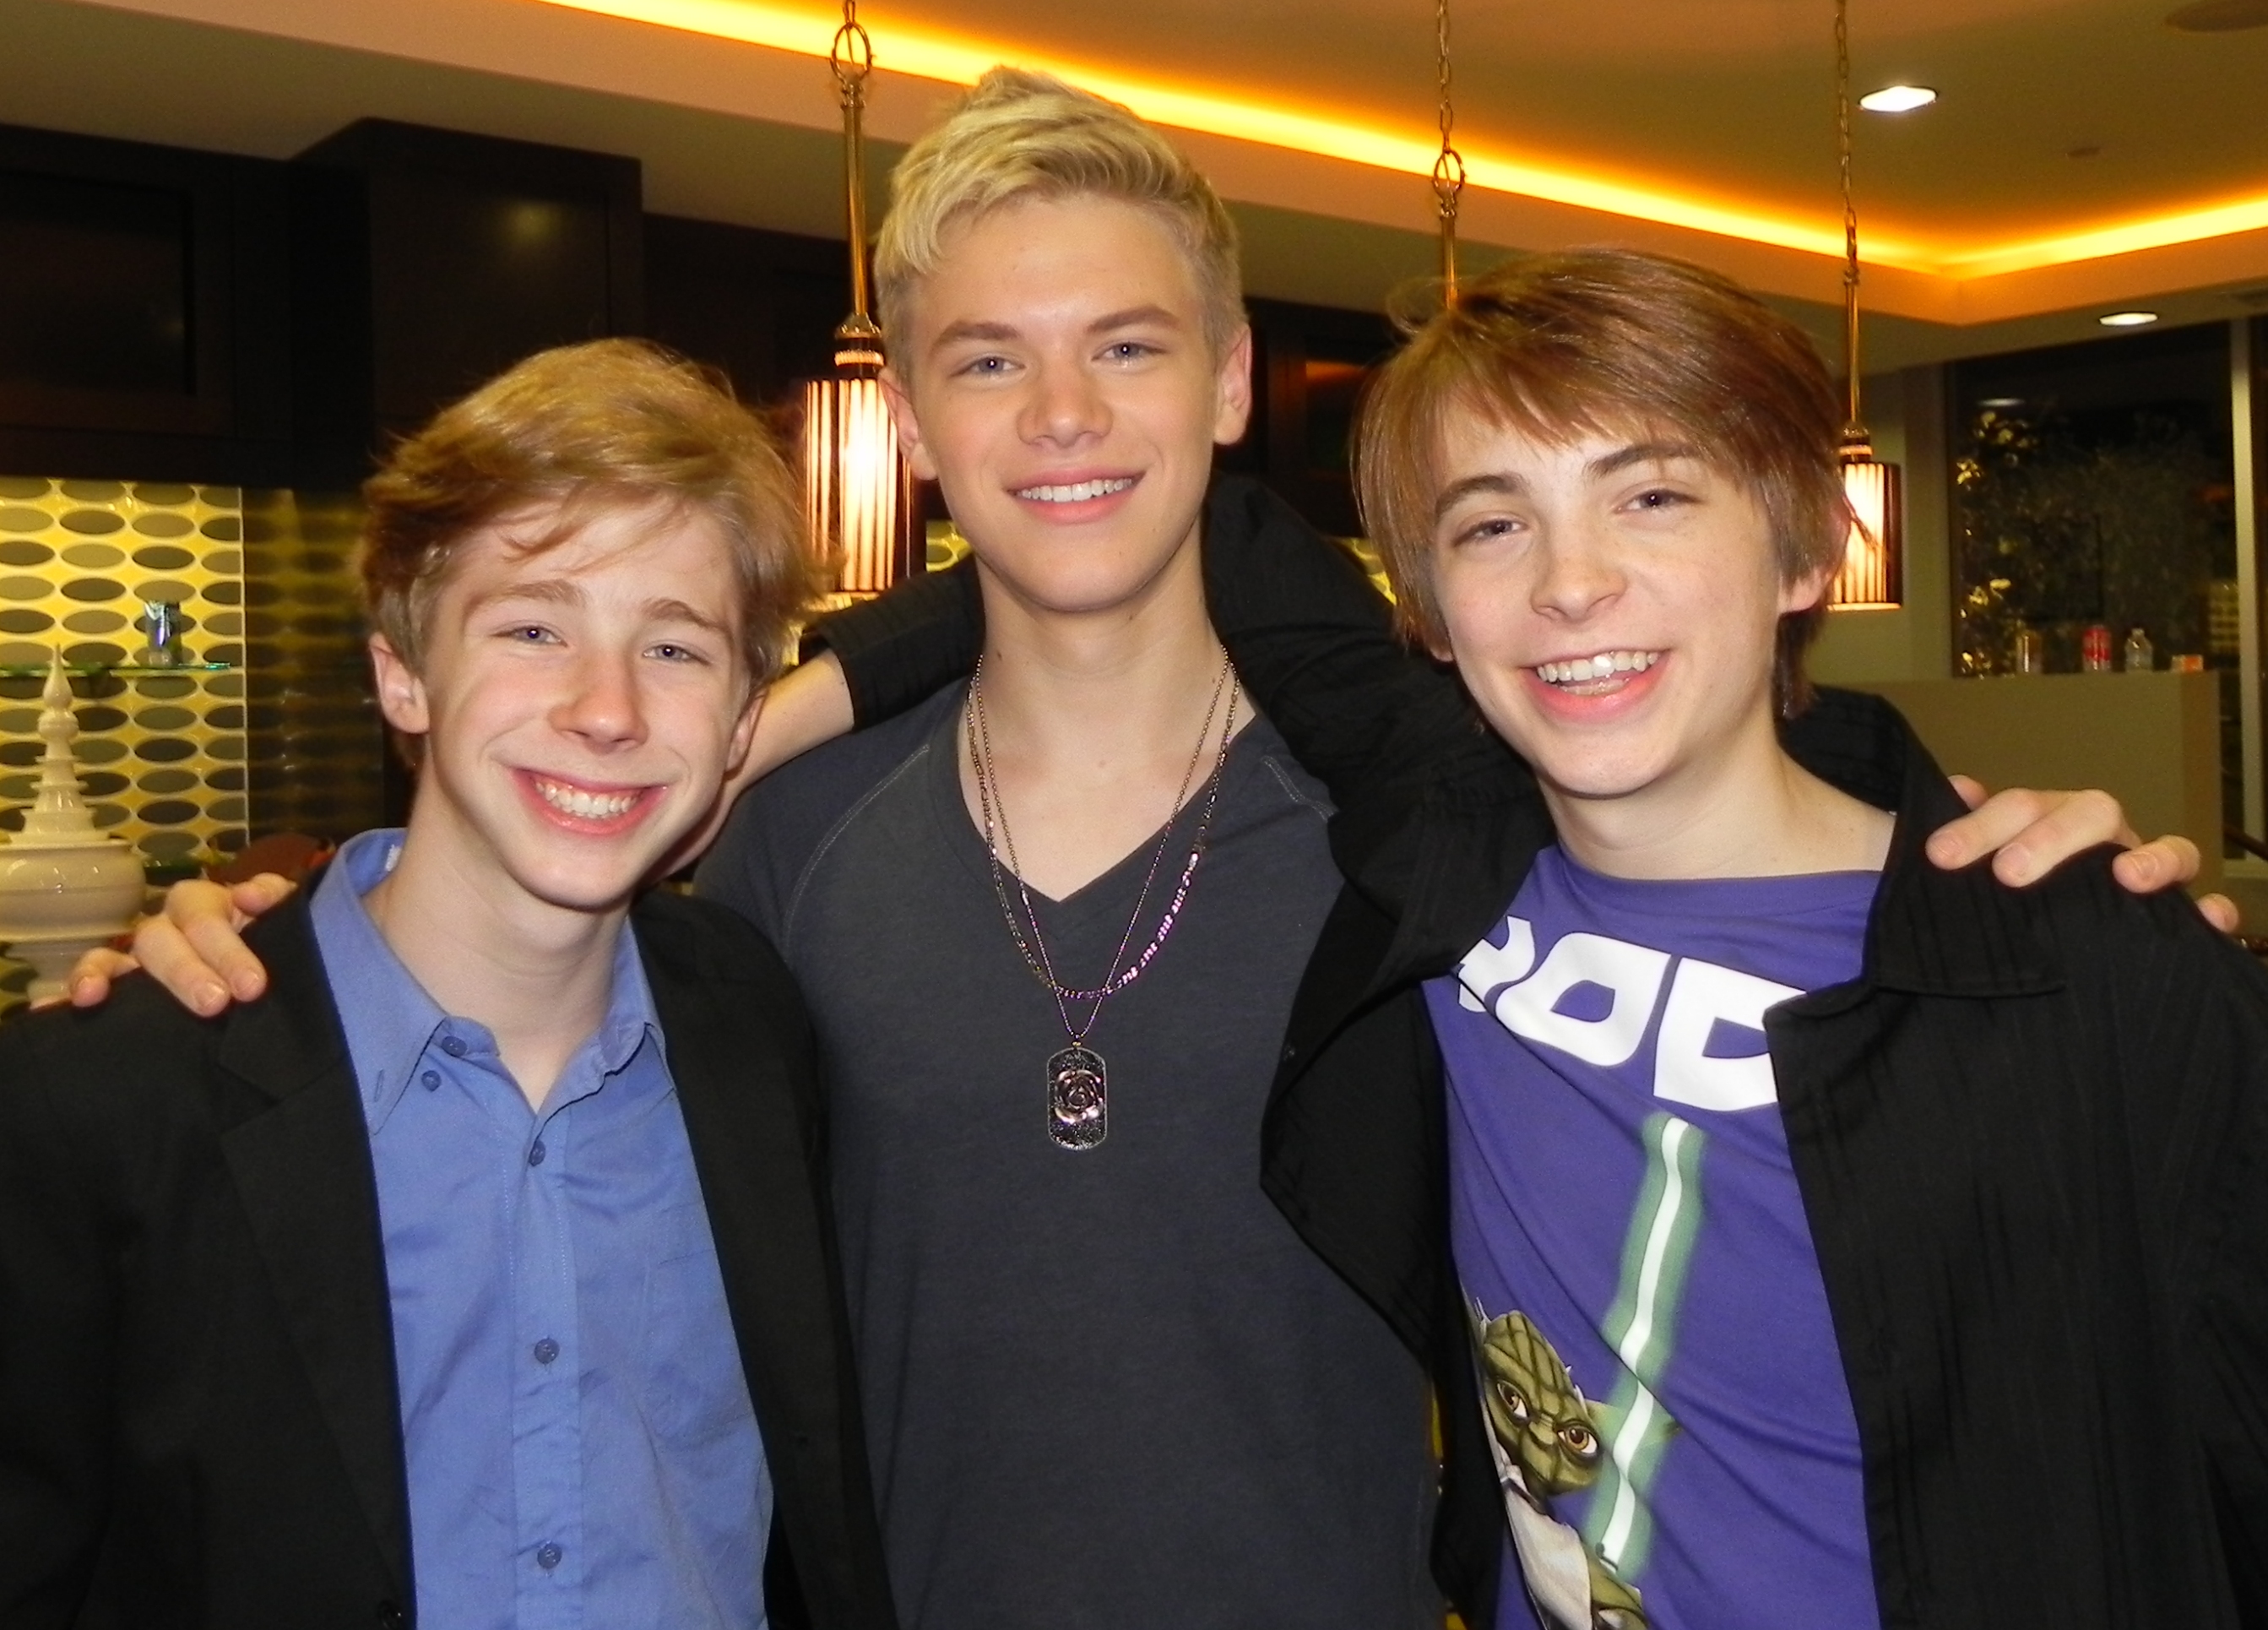 Kenton Duty, Dylan Riley Snyder and Joey Luthman at the Joey's 15th Bday,, Triple J Birthday at Rubiks in Hollywood.